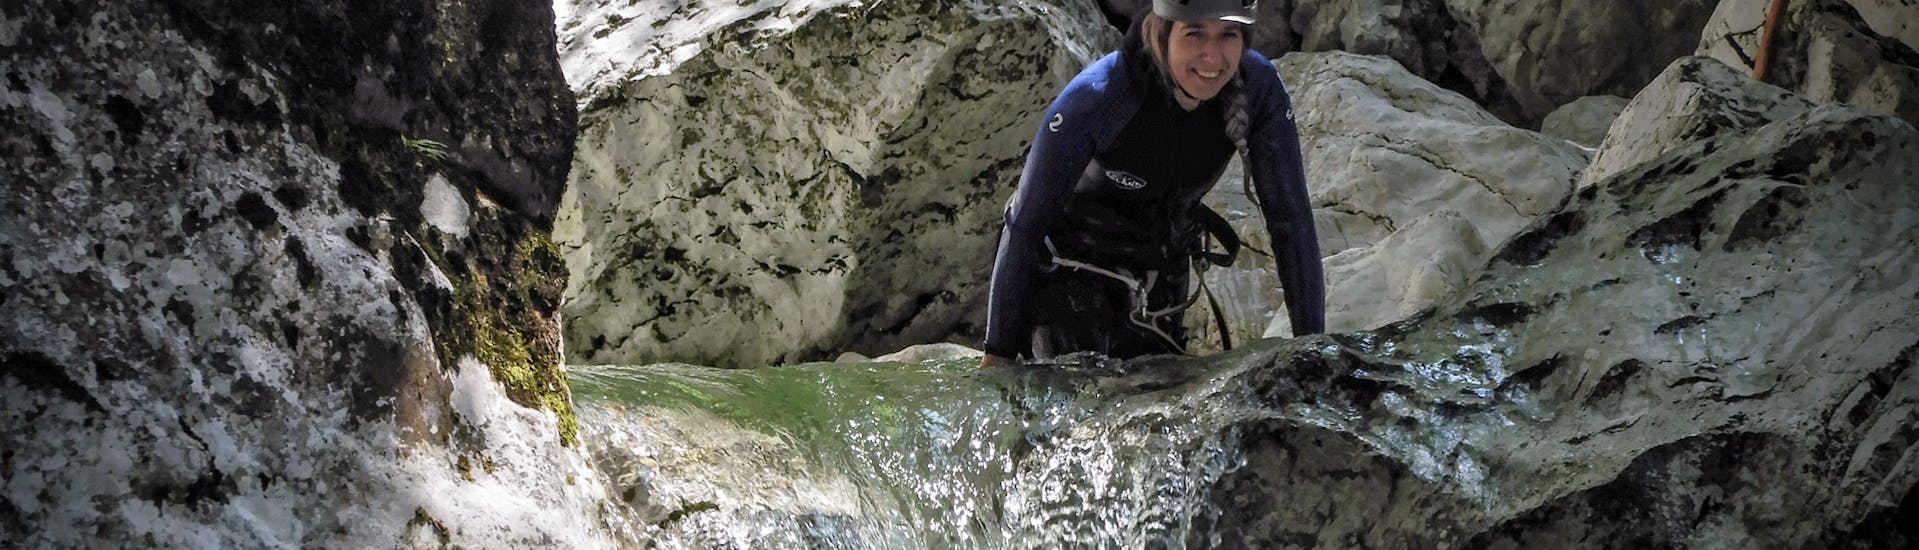 A woman enjoing the Full-Day Canyoning in Trockenbach near Kufstein.